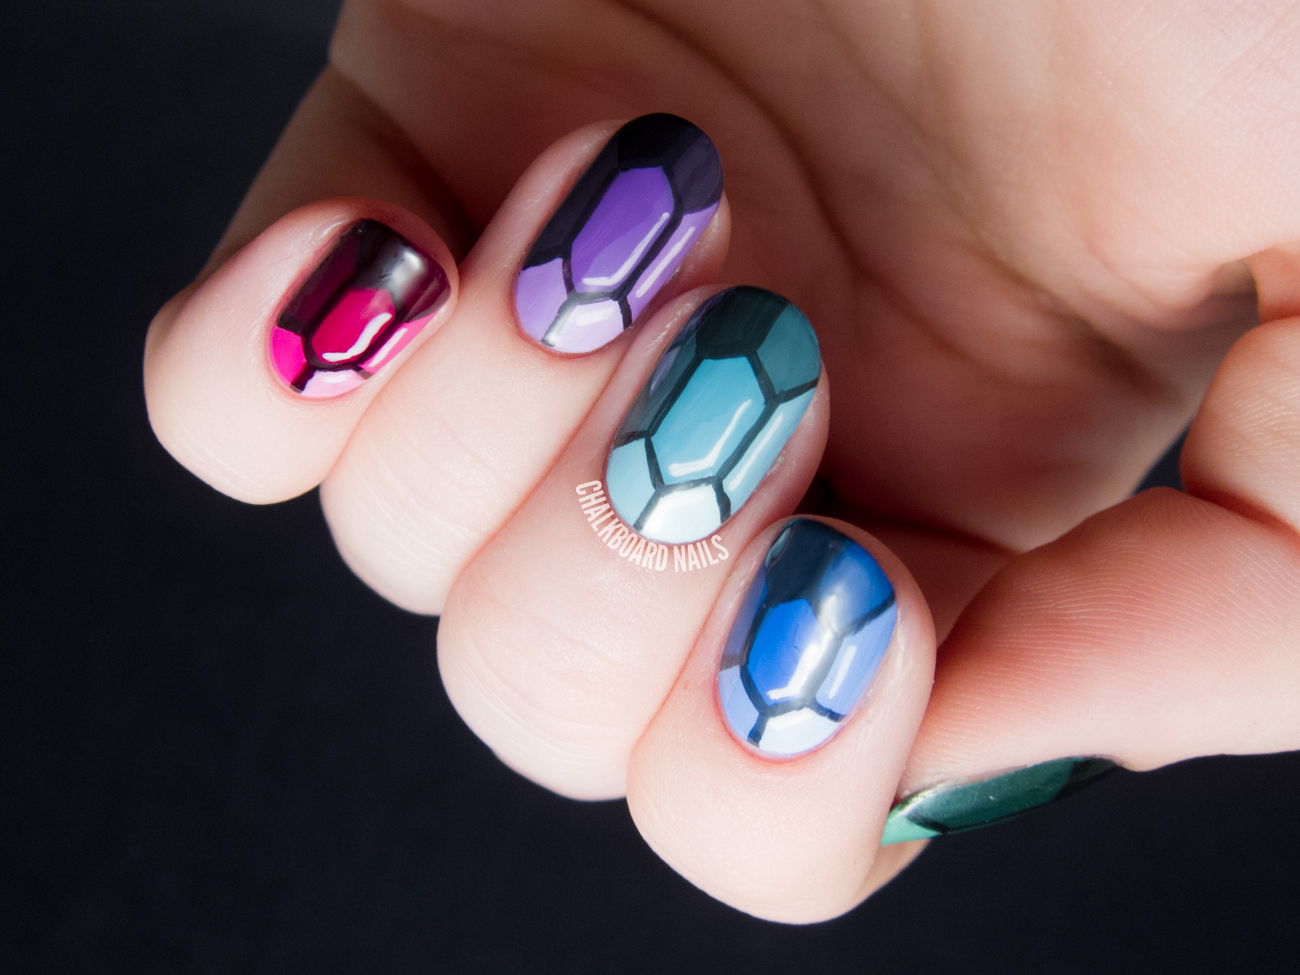 7. How to Apply Different Sized Nail Art Gems - wide 6